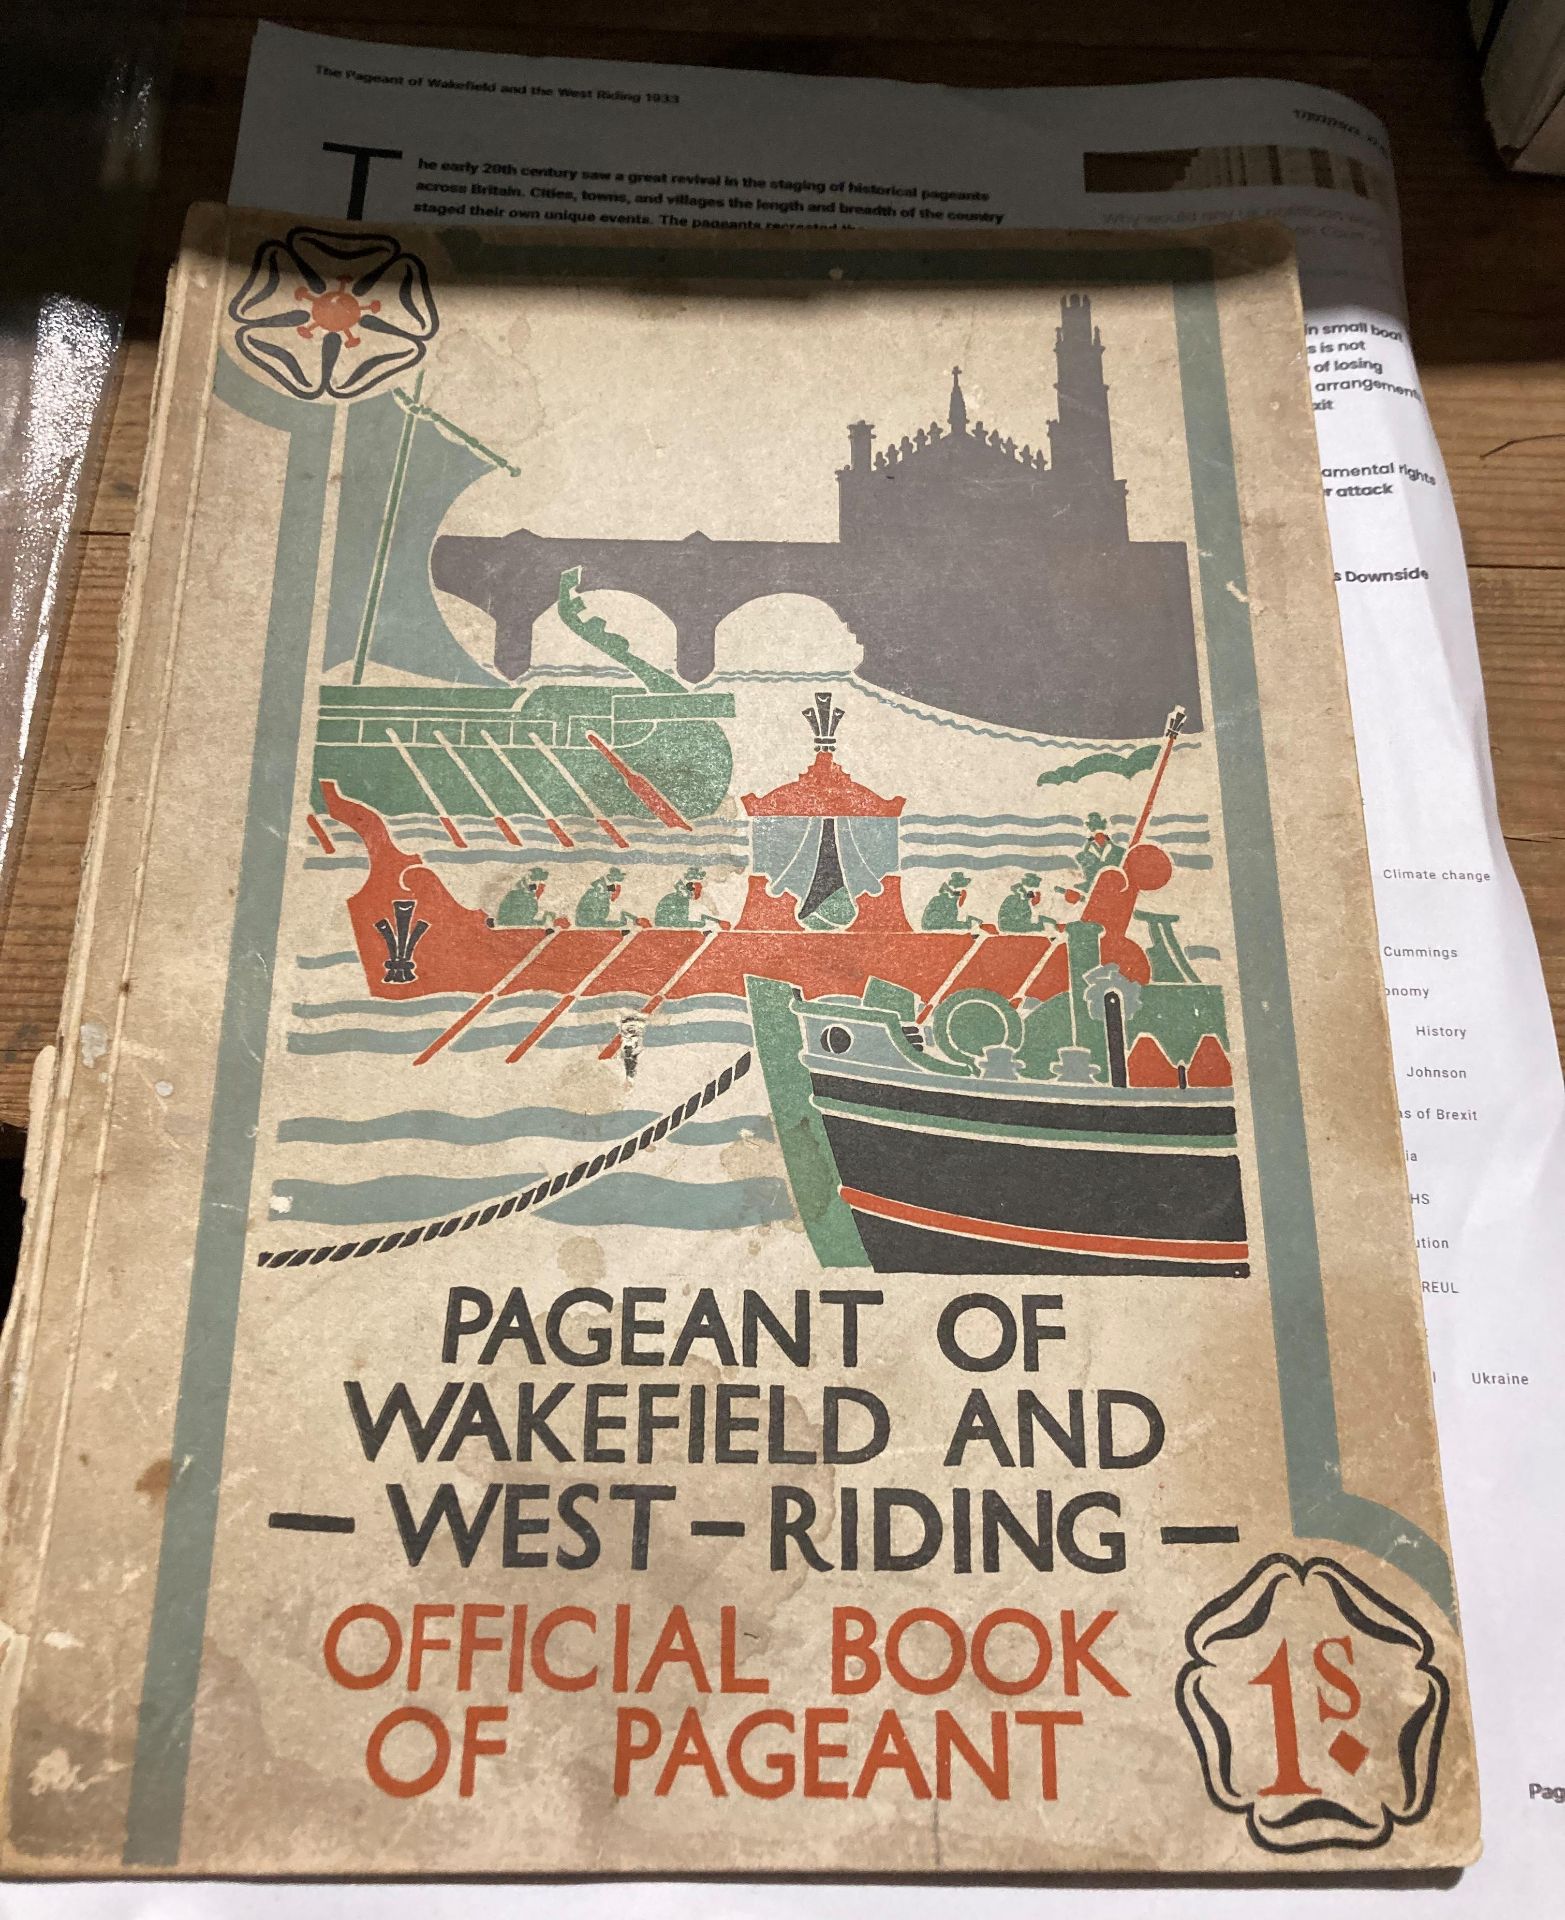 Official book of Pageant - Pageant of Wakefield and West Riding 17th to 24th June,